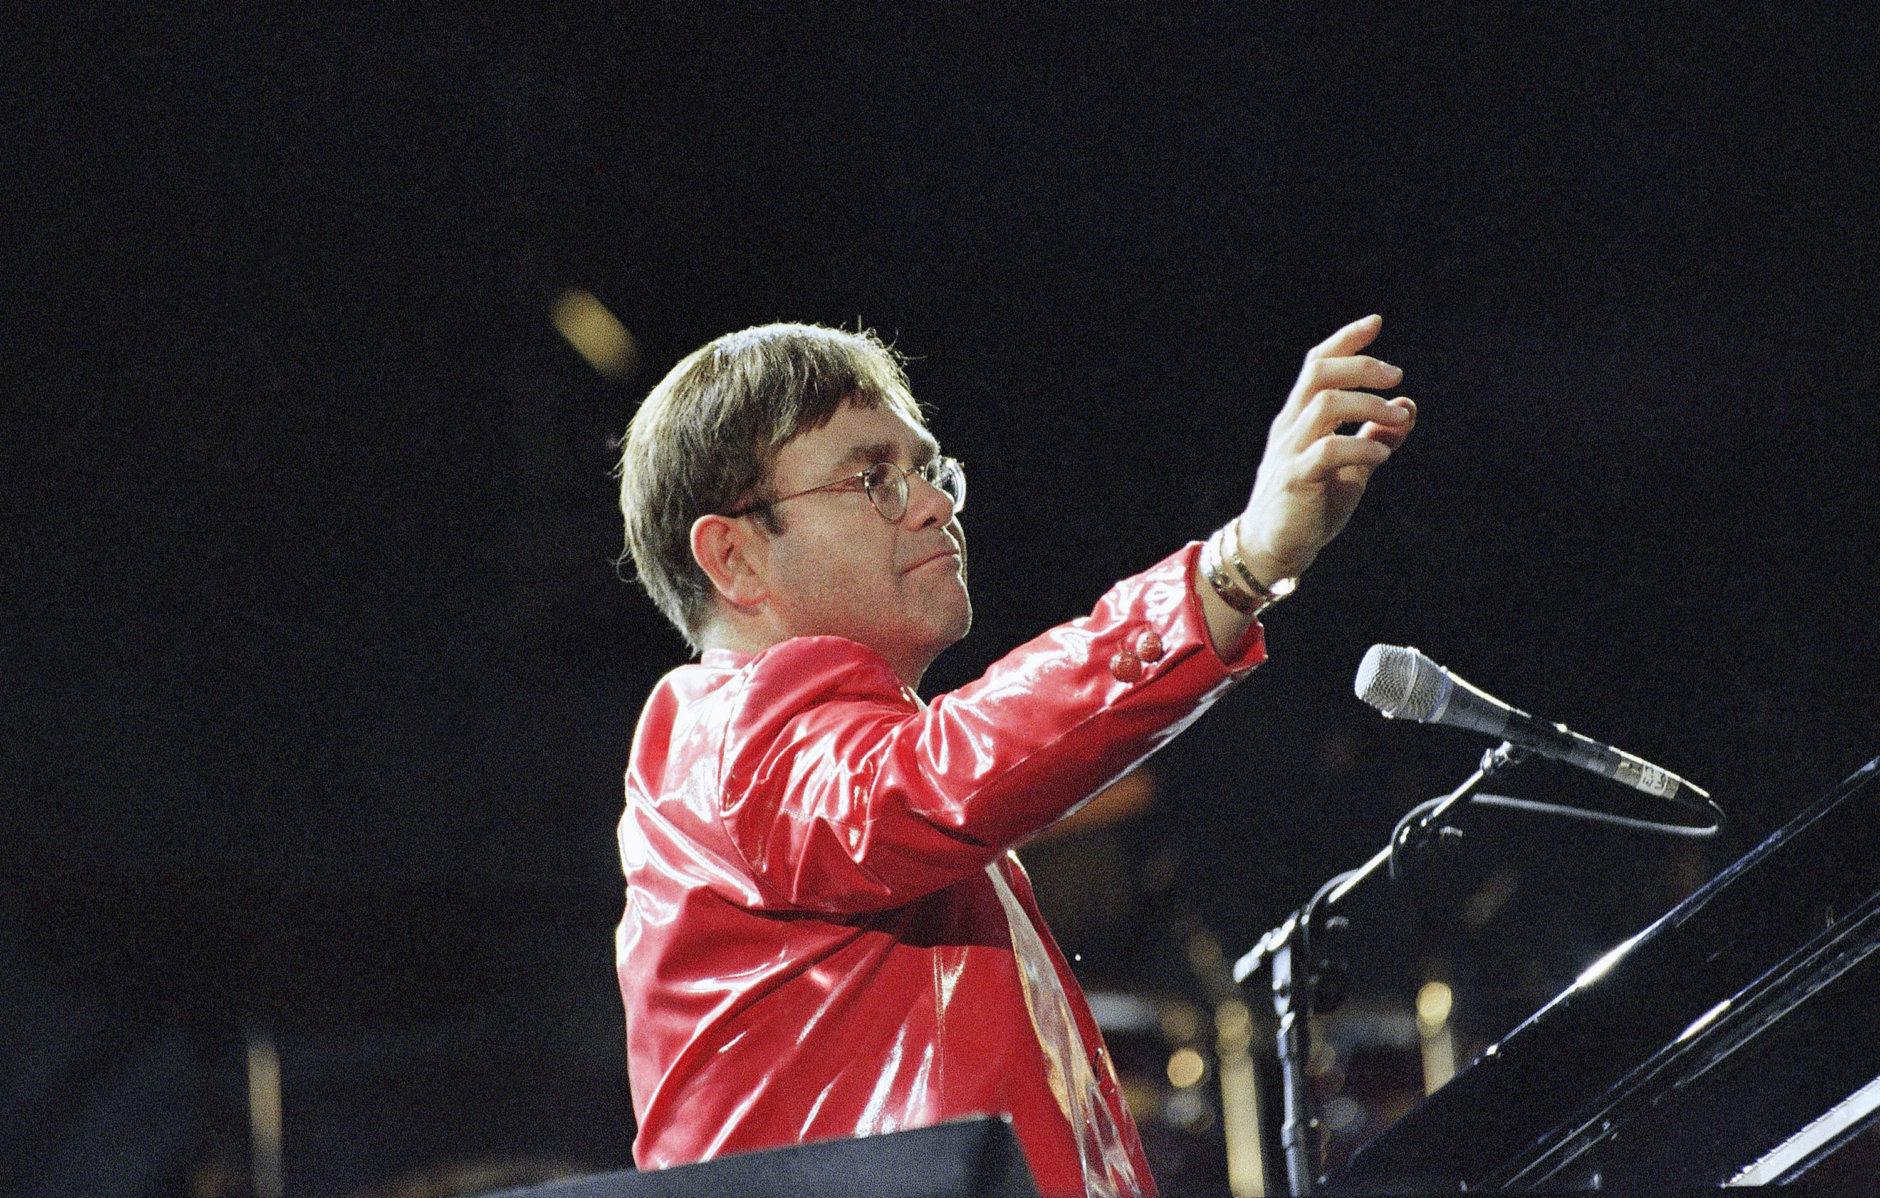 Elton John performs at the piano during a concert at Busch Stadium in St. Louis, Aug. 9, 1994. Elton John and Billy Joel performed together on stage for more than 50,000 fans. (AP Photo/James A. Finley)